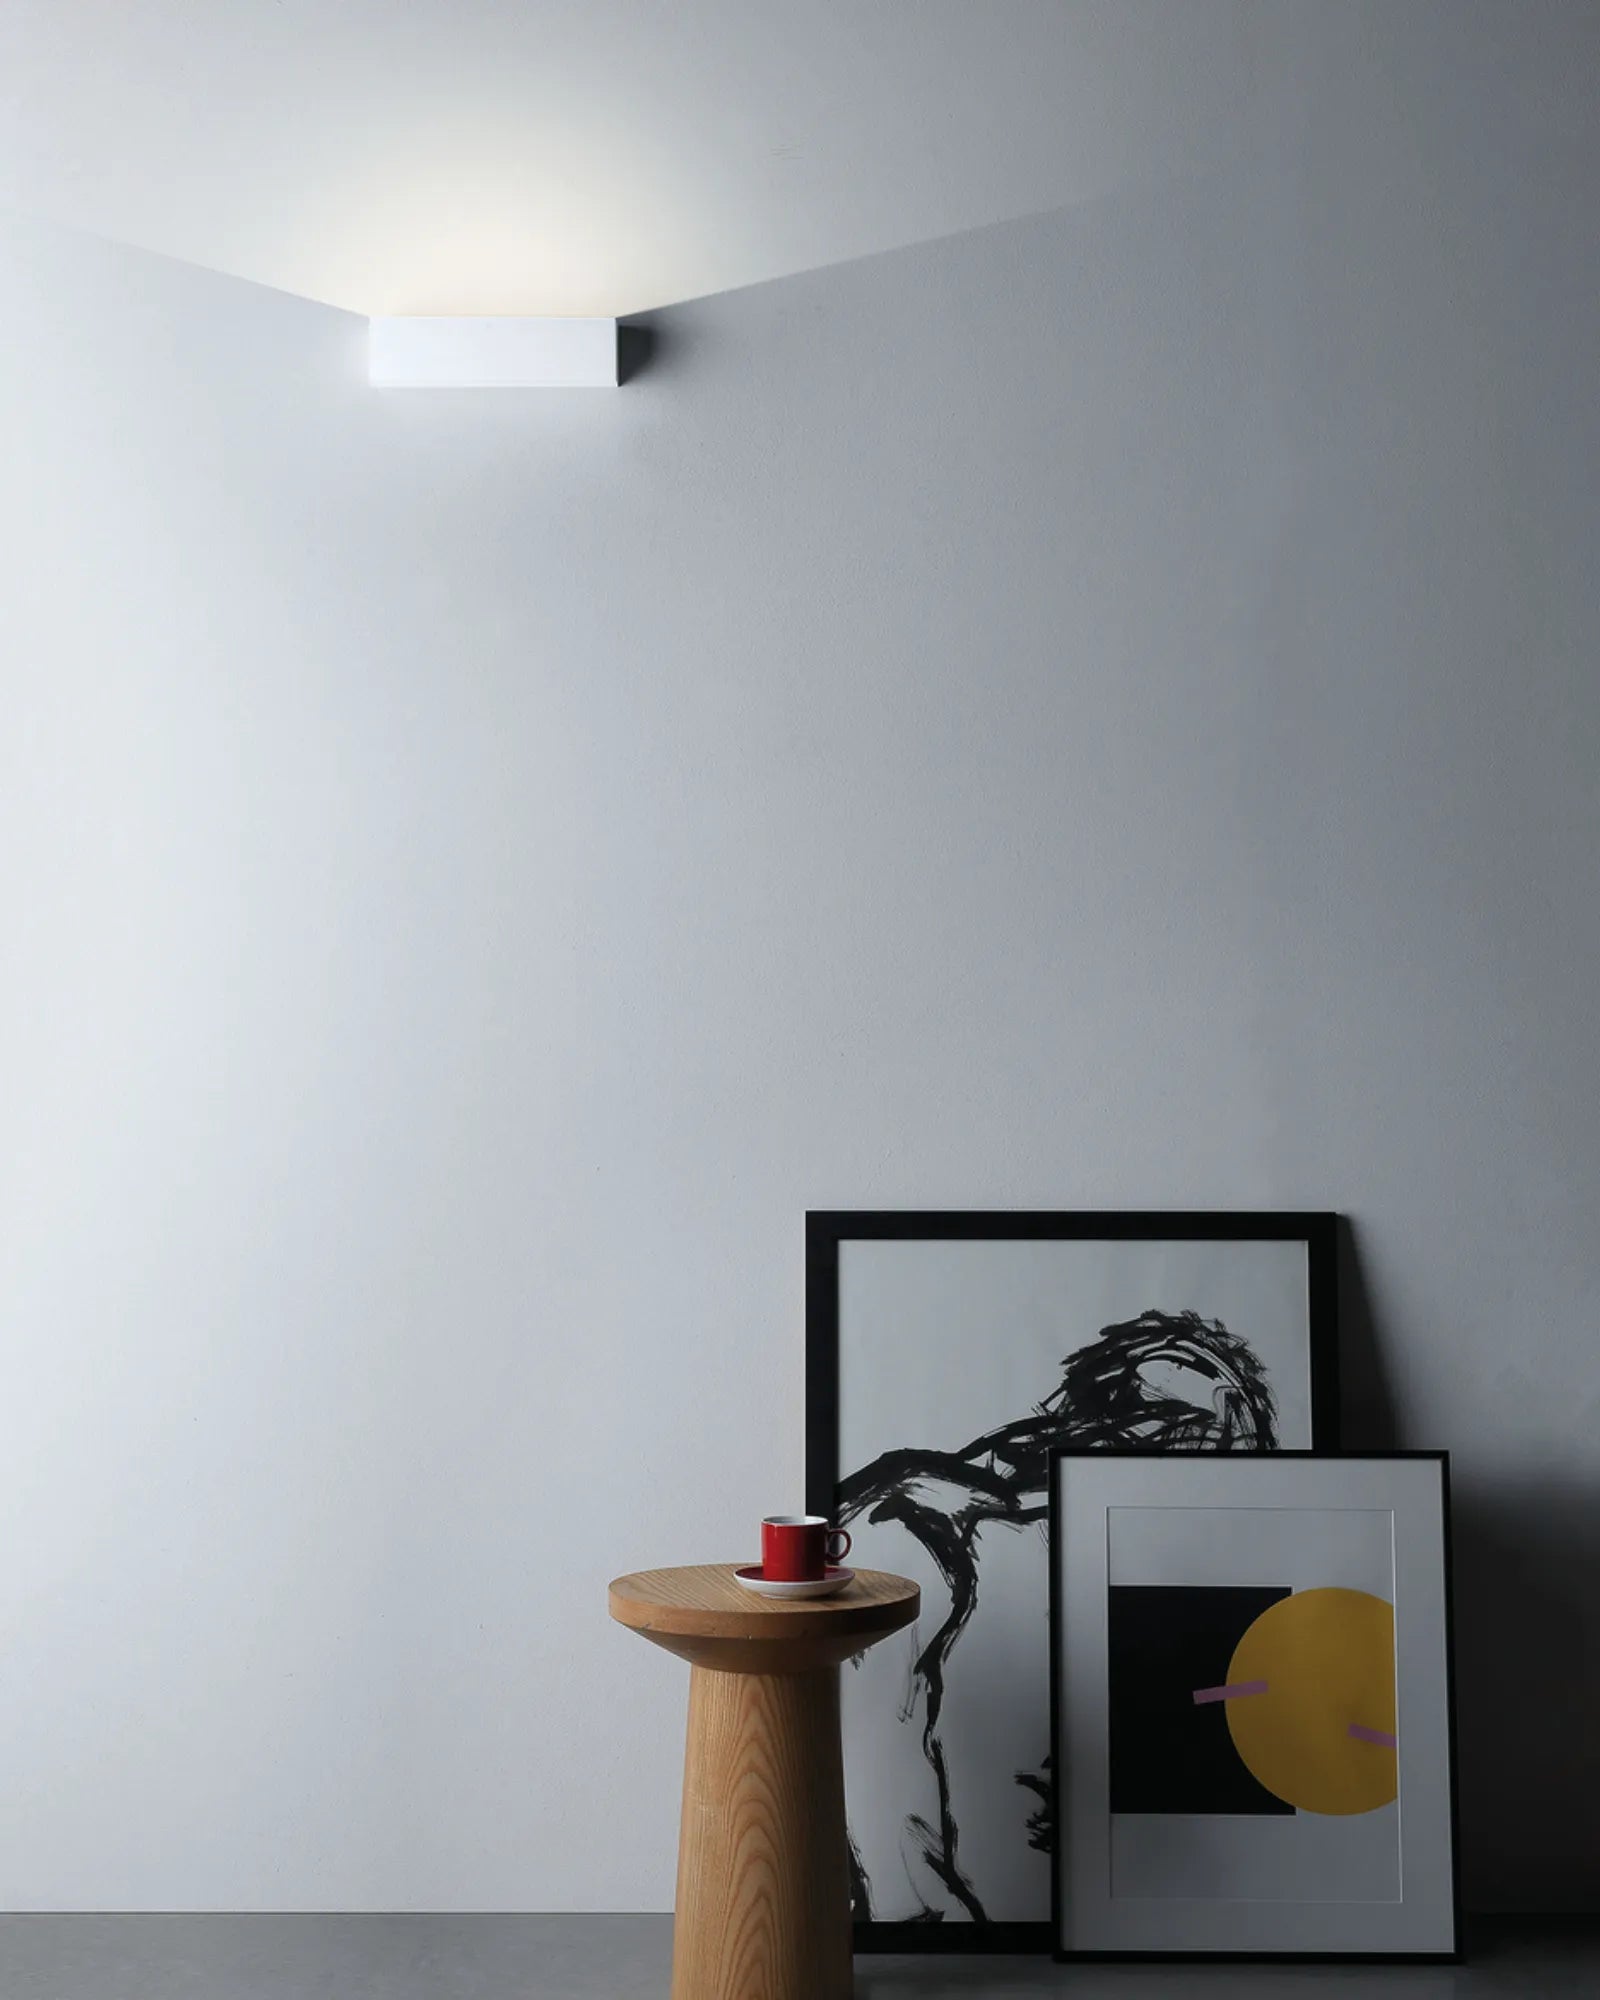 Parma 200 minimalistic plaster rectangular wall light by Astro Litghting | Nook Collections